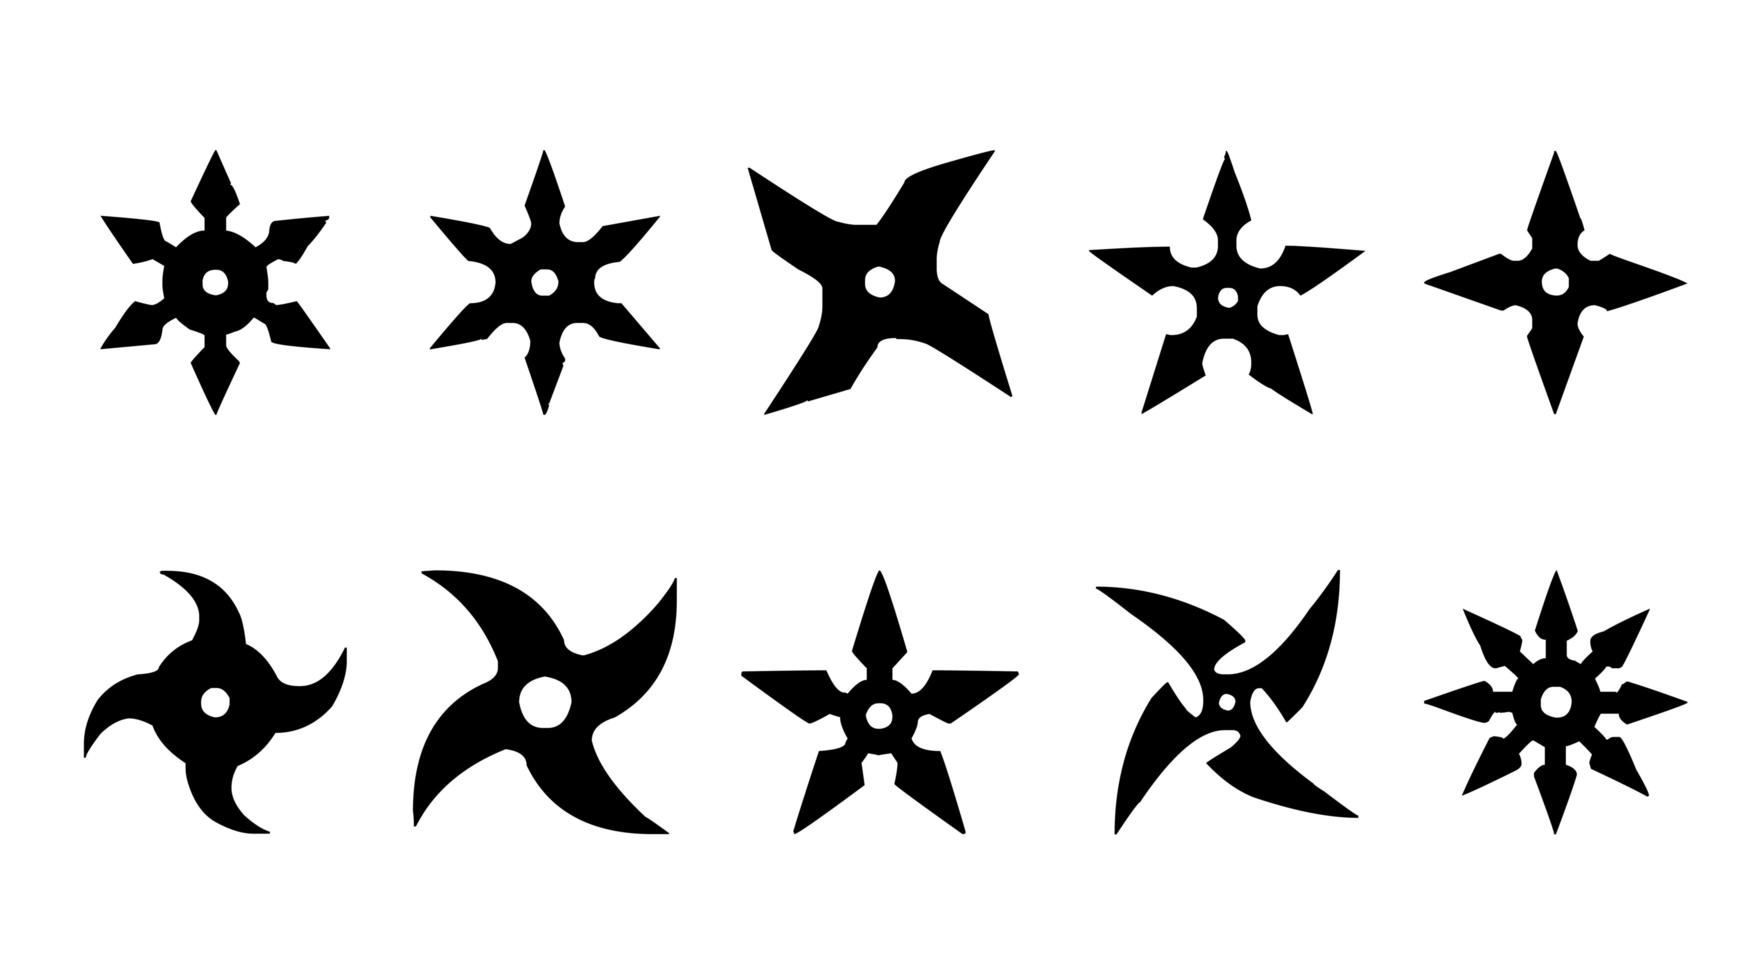 Shuriken Icons with Various Shapes 1234670 - Download Free Vectors ...